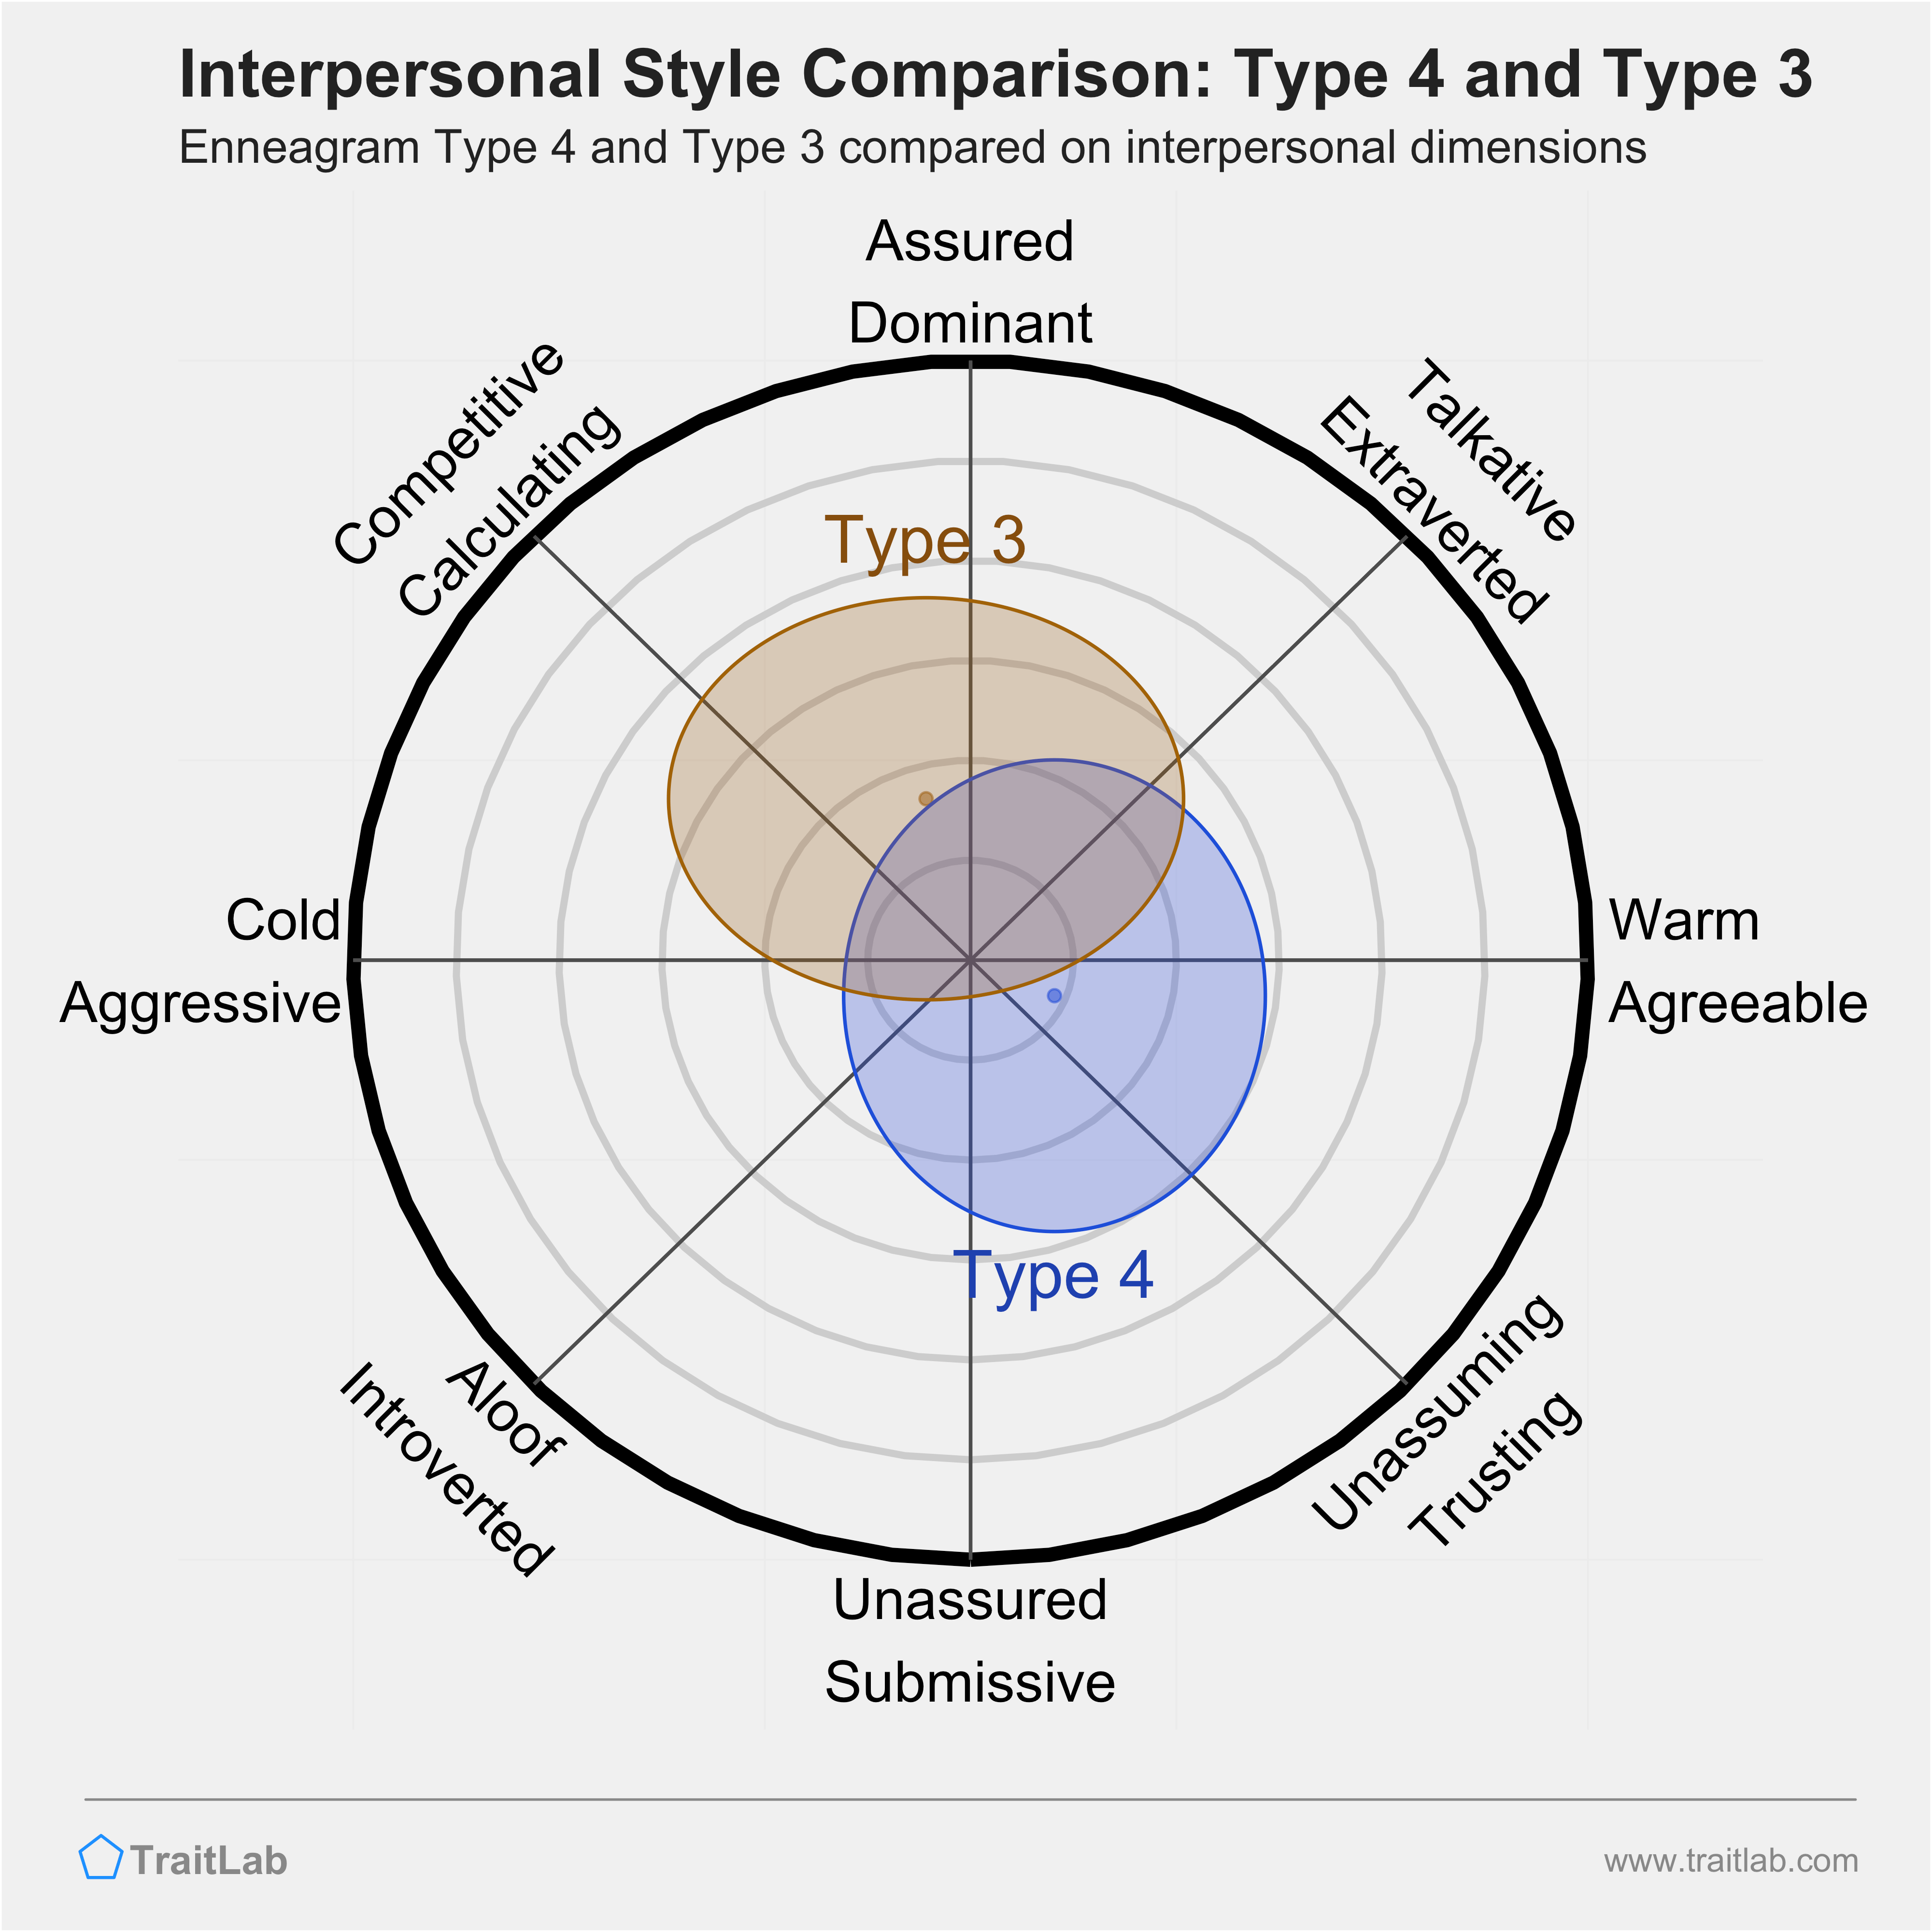 Enneagram Type 4 and Type 3 comparison across interpersonal dimensions